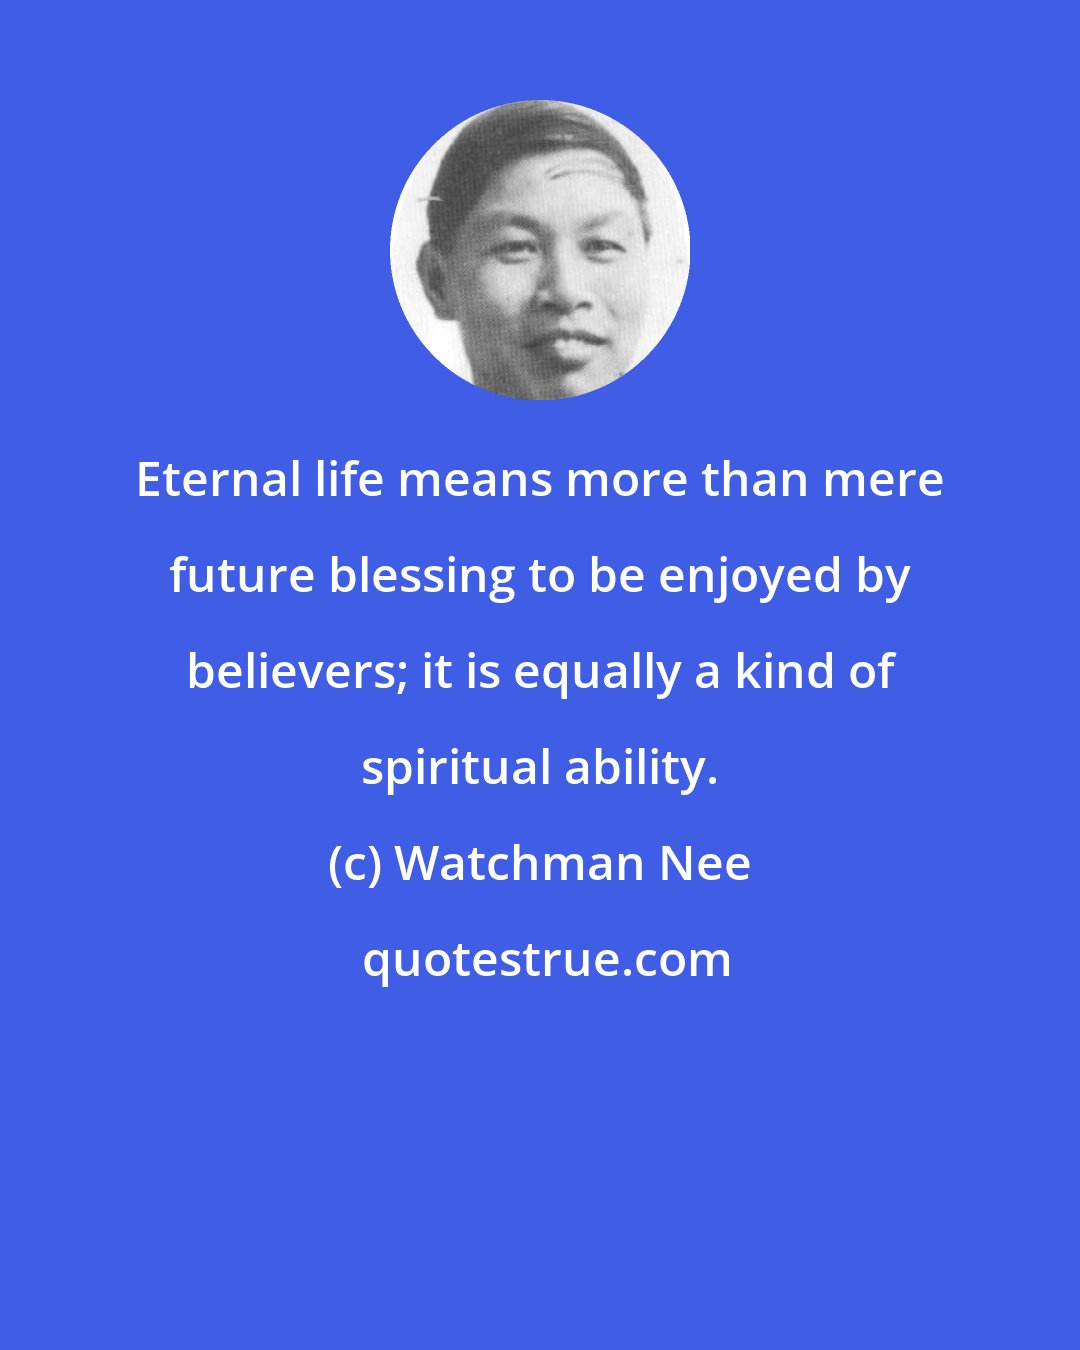 Watchman Nee: Eternal life means more than mere future blessing to be enjoyed by believers; it is equally a kind of spiritual ability.